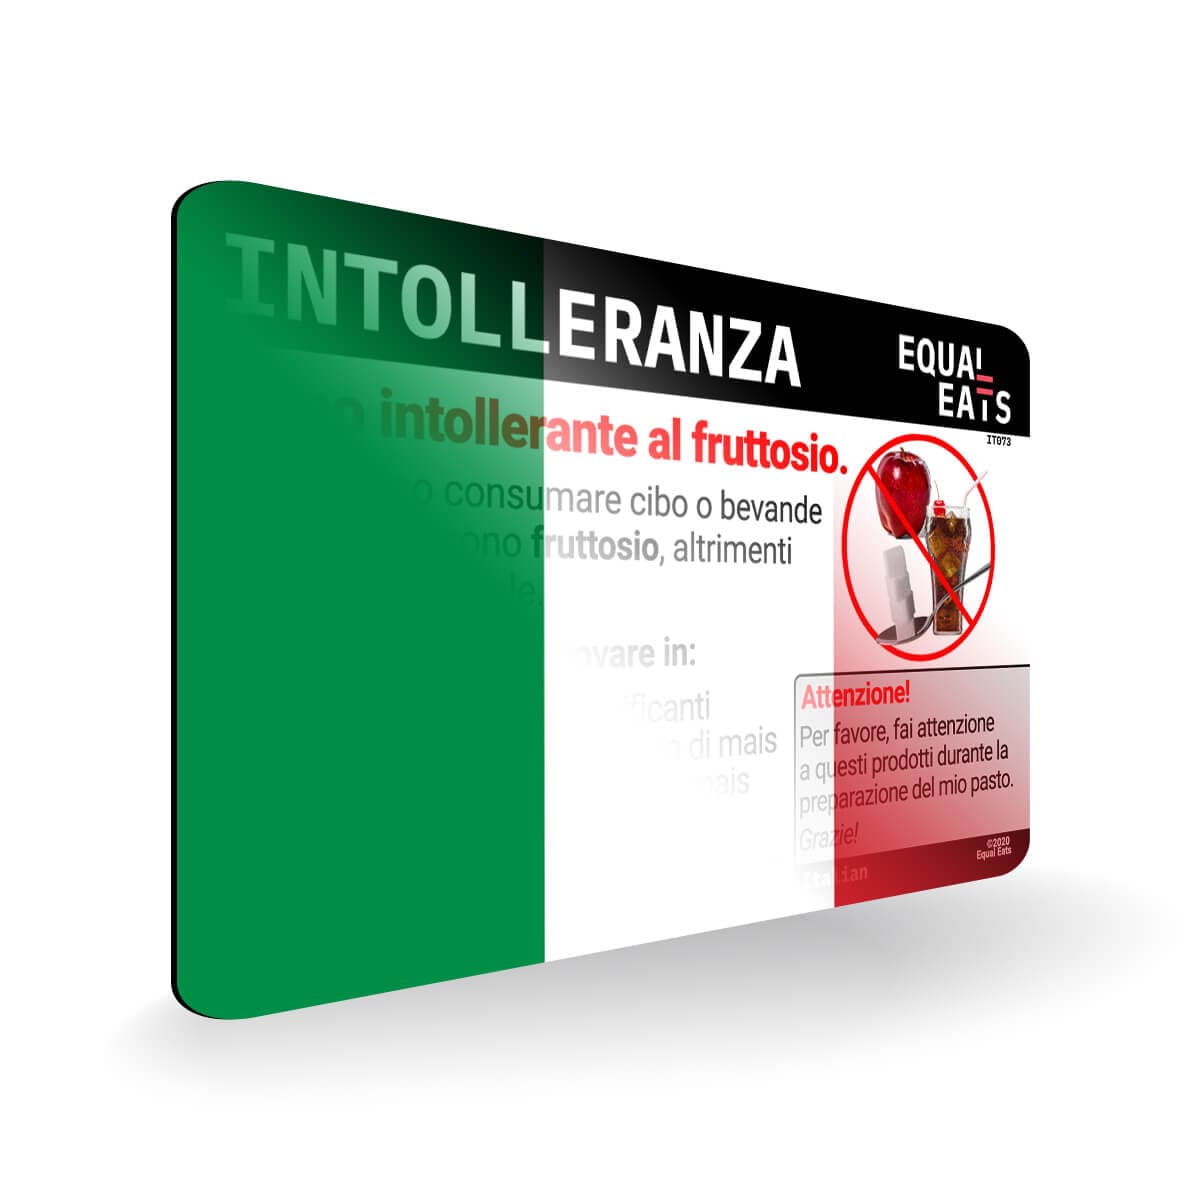 Fructose Intolerance in Italian. Fructose Intolerant Card for Italy